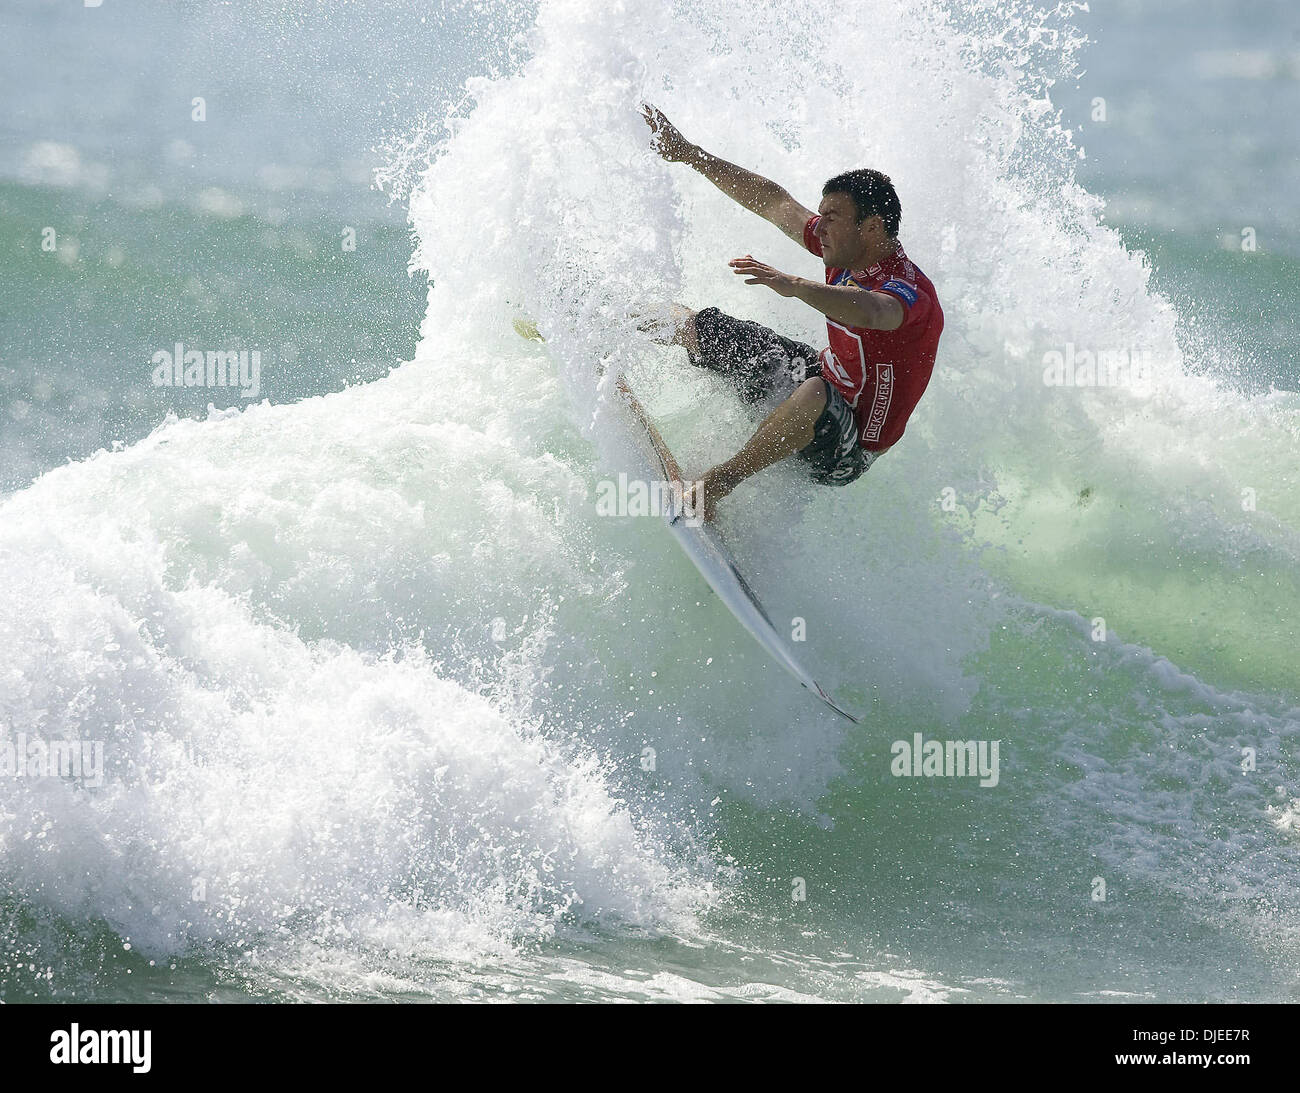 Sep 02, 2004; Hebara Beach, Chiba, Japan; Australian JOEL PARKINSON scored a narrow victory over compatriots Kieren Perrow (Byron Bay, NSW) and Luke Hitchings (Sydney, NSW) to advance to round threef the Quiksilver Pro Japan which is the sixth of 12 of events for the men on the 2004 Fosters ASP World Tour and features the top 45 surfers in world and three wild card surfers. Stock Photo